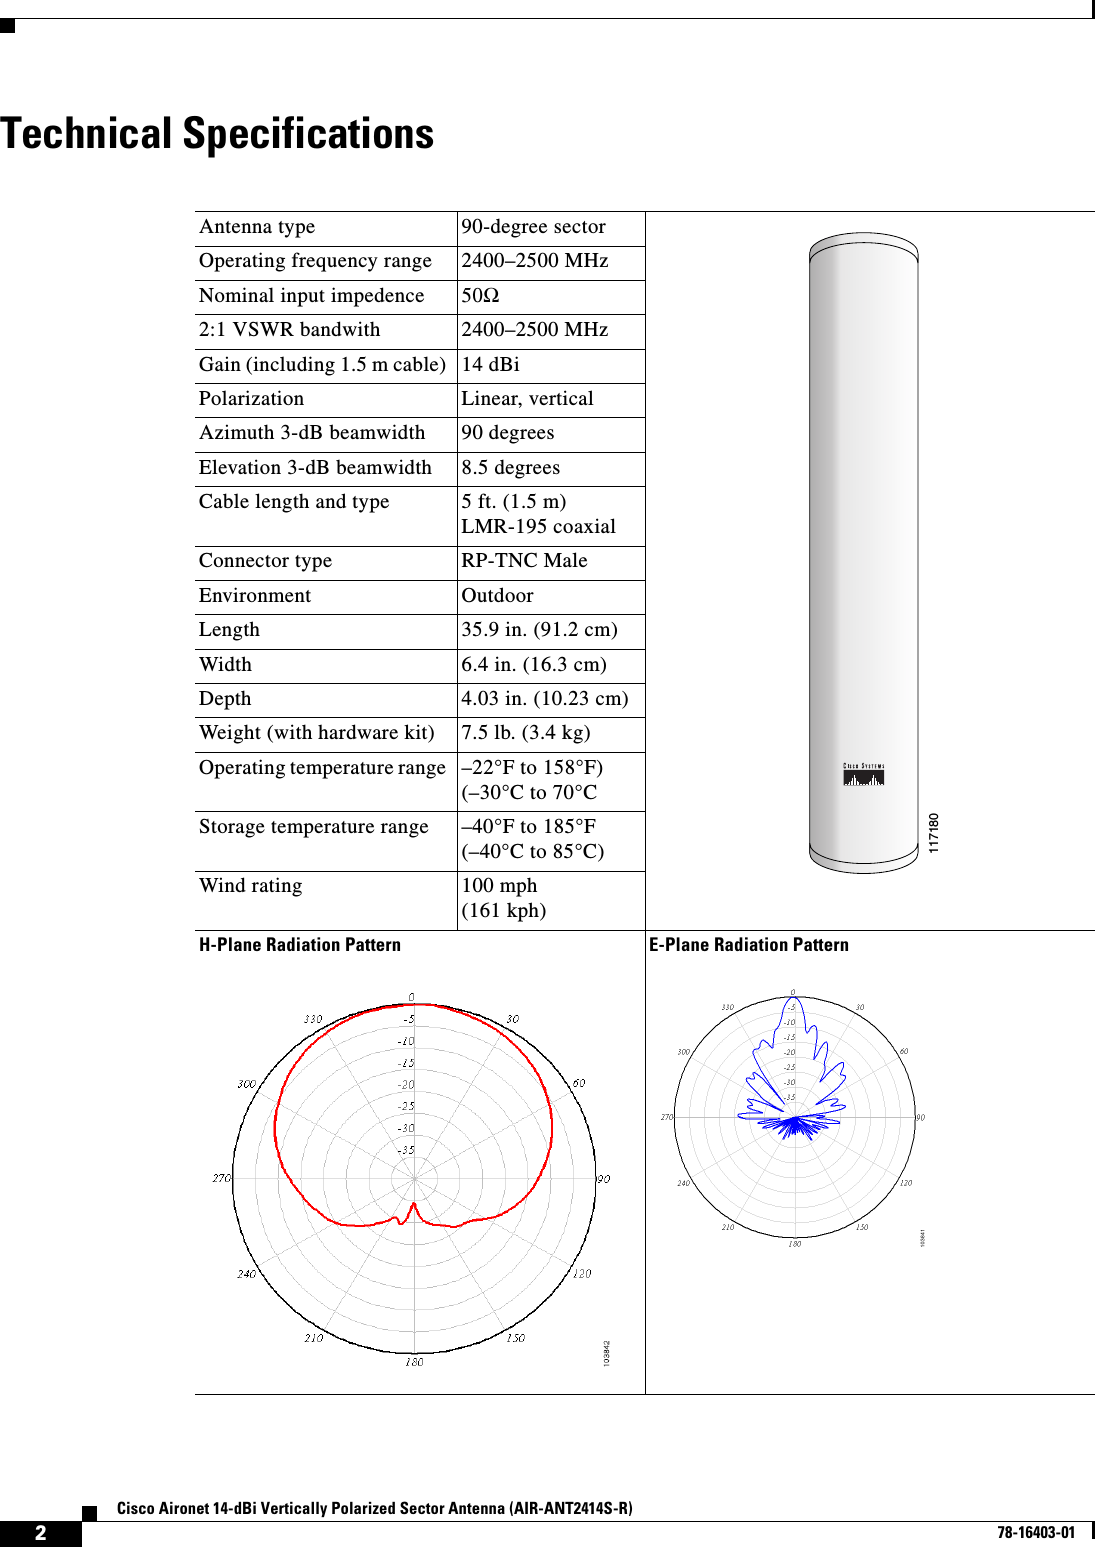 2Cisco Aironet 14-dBi Vertically Polarized Sector Antenna (AIR-ANT2414S-R)78-16403-01Technical SpecificationsAntenna type 90-degree sectorOperating frequency range 2400–2500 MHzNominal input impedence 50Ω2:1 VSWR bandwith  2400–2500 MHzGain (including 1.5 m cable) 14 dBiPolarization Linear, verticalAzimuth 3-dB beamwidth 90 degreesElevation 3-dB beamwidth 8.5 degreesCable length and type 5 ft. (1.5 m) LMR-195 coaxialConnector type RP-TNC MaleEnvironment OutdoorLength 35.9 in. (91.2 cm)Width 6.4 in. (16.3 cm)Depth 4.03 in. (10.23 cm)Weight (with hardware kit) 7.5 lb. (3.4 kg)Operating temperature range –22°F to 158°F)(–30°C to 70°CStorage temperature range –40°F to 185°F(–40°C to 85°C)Wind rating 100 mph (161 kph)H-Plane Radiation Pattern E-Plane Radiation Pattern117180